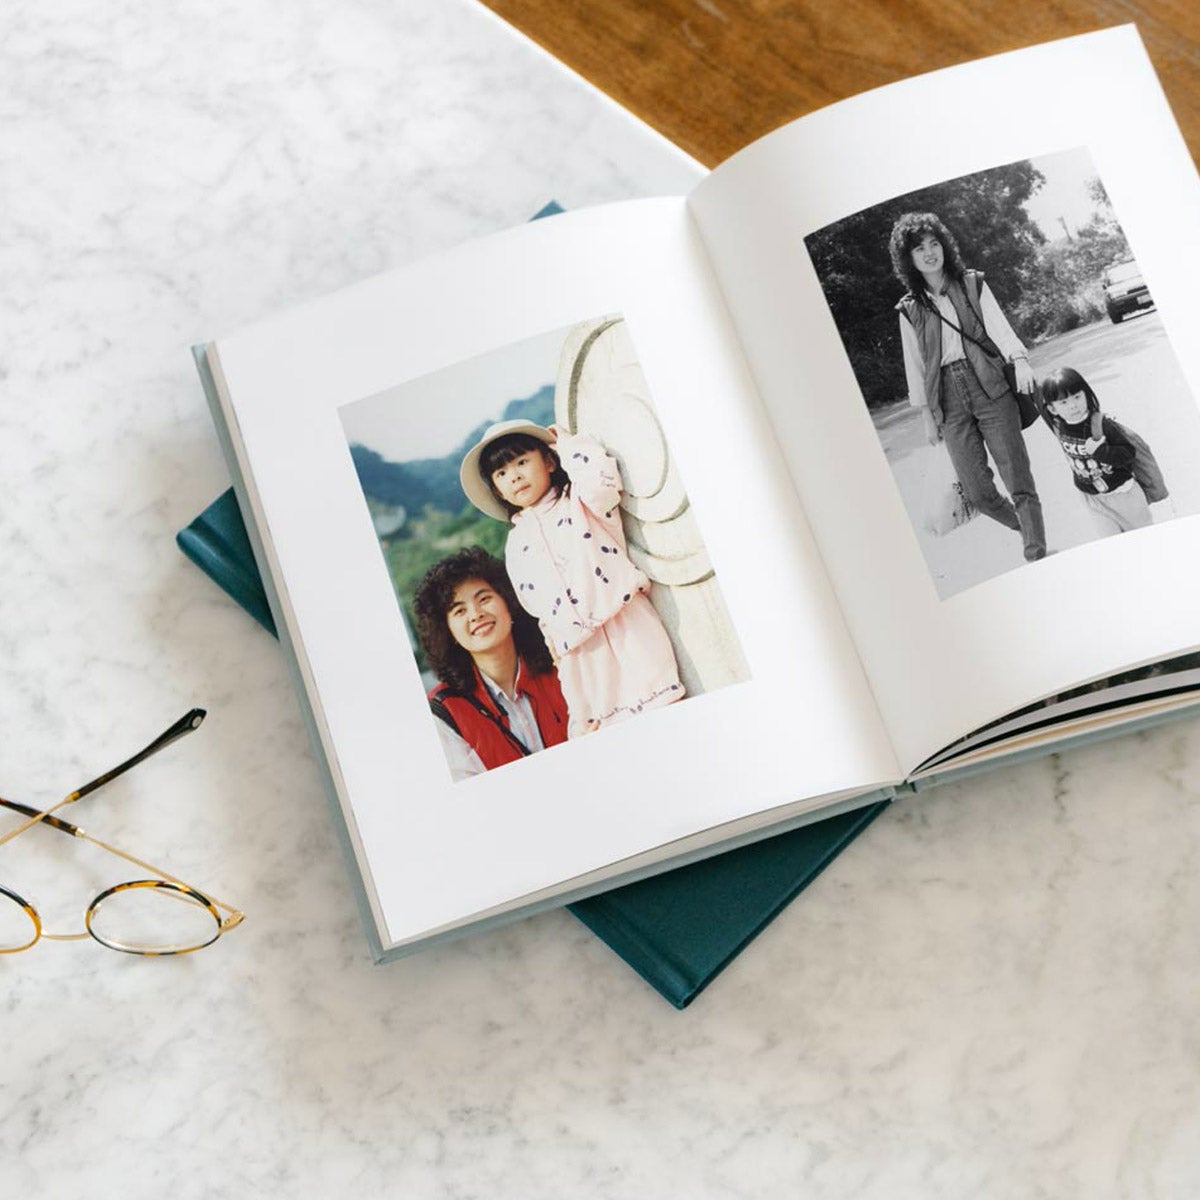 Hardcover photo book opened to photos of mom with daughter